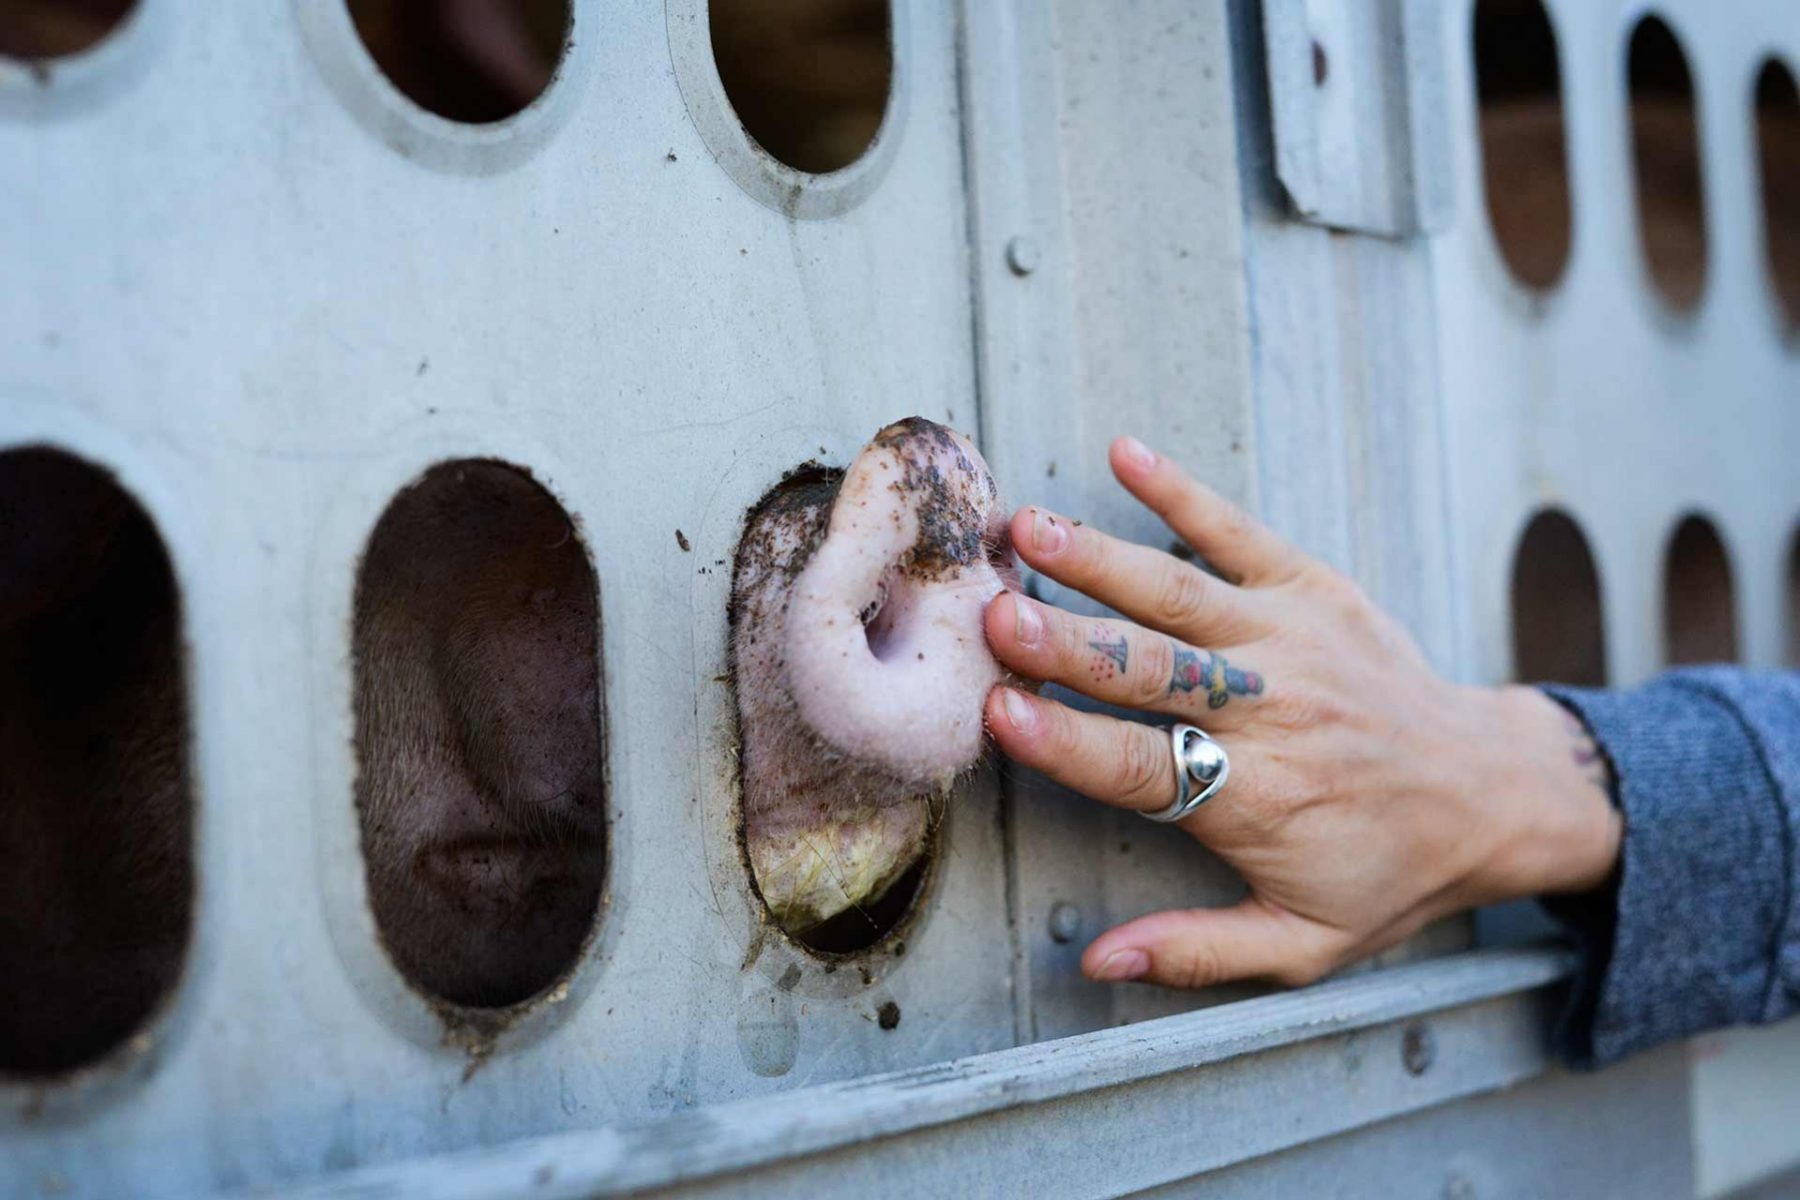 Activist Karen Bowman touches the snout of a pig who is en route to slaughter, during a Toronto Pig Save vigil. Canada, 2013